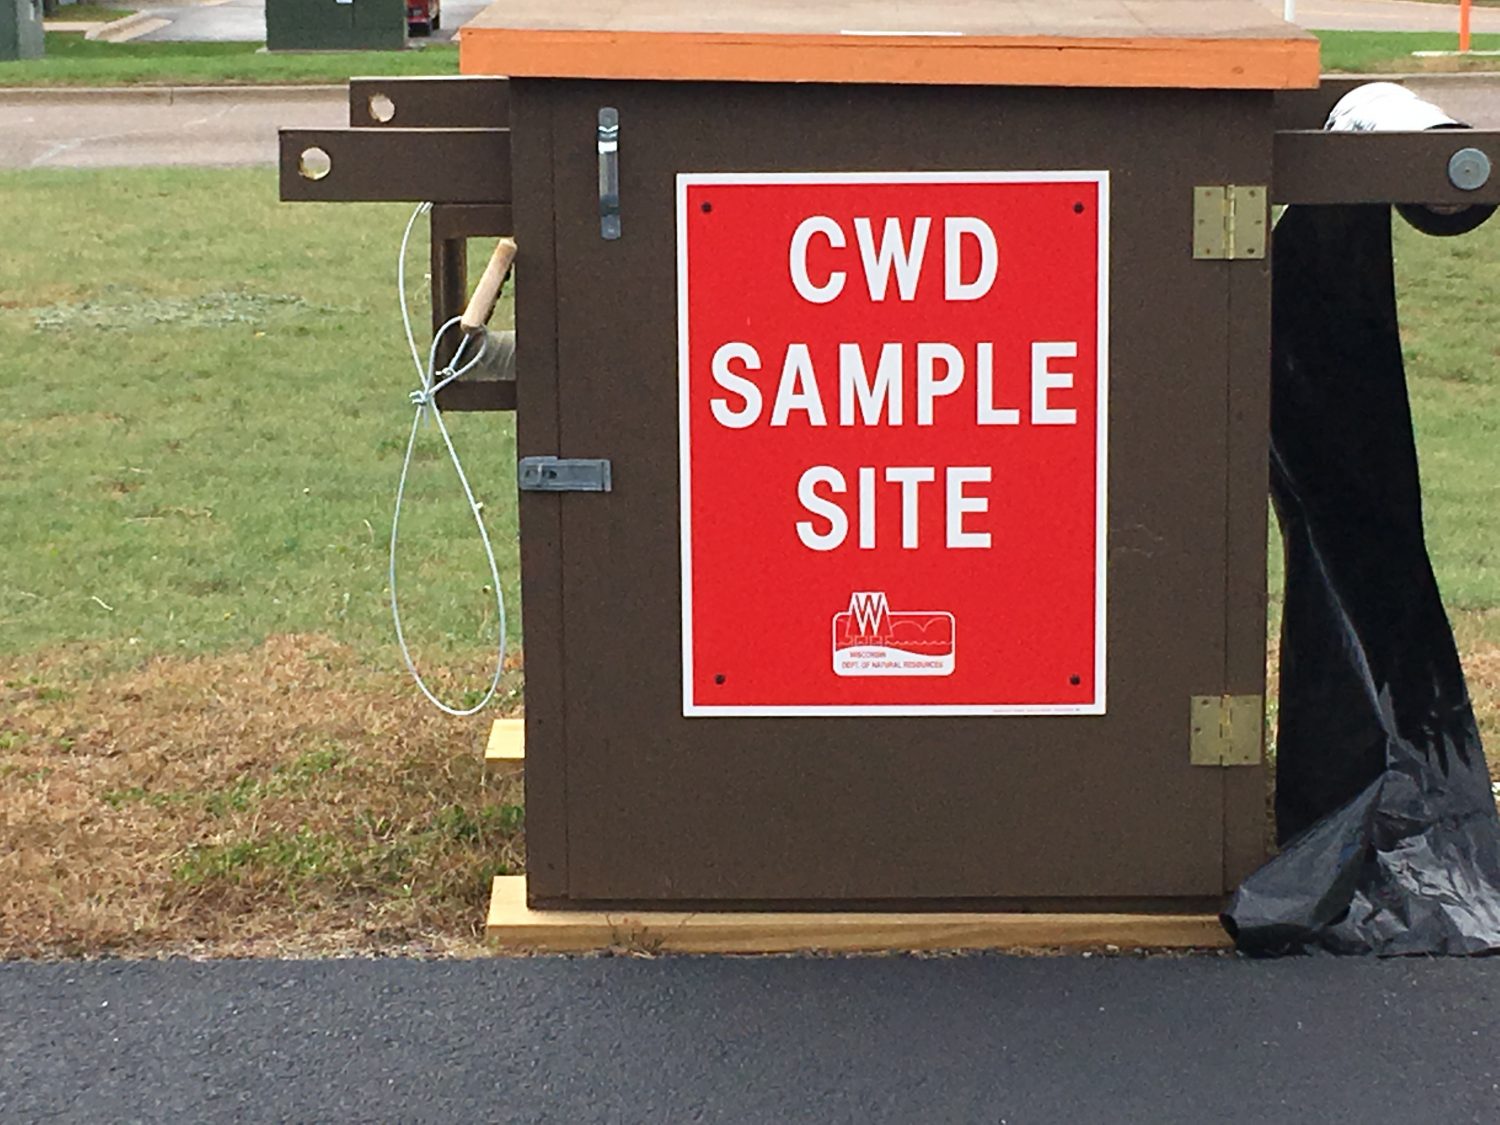 DNR steps up CWD tracking efforts with collection kiosks